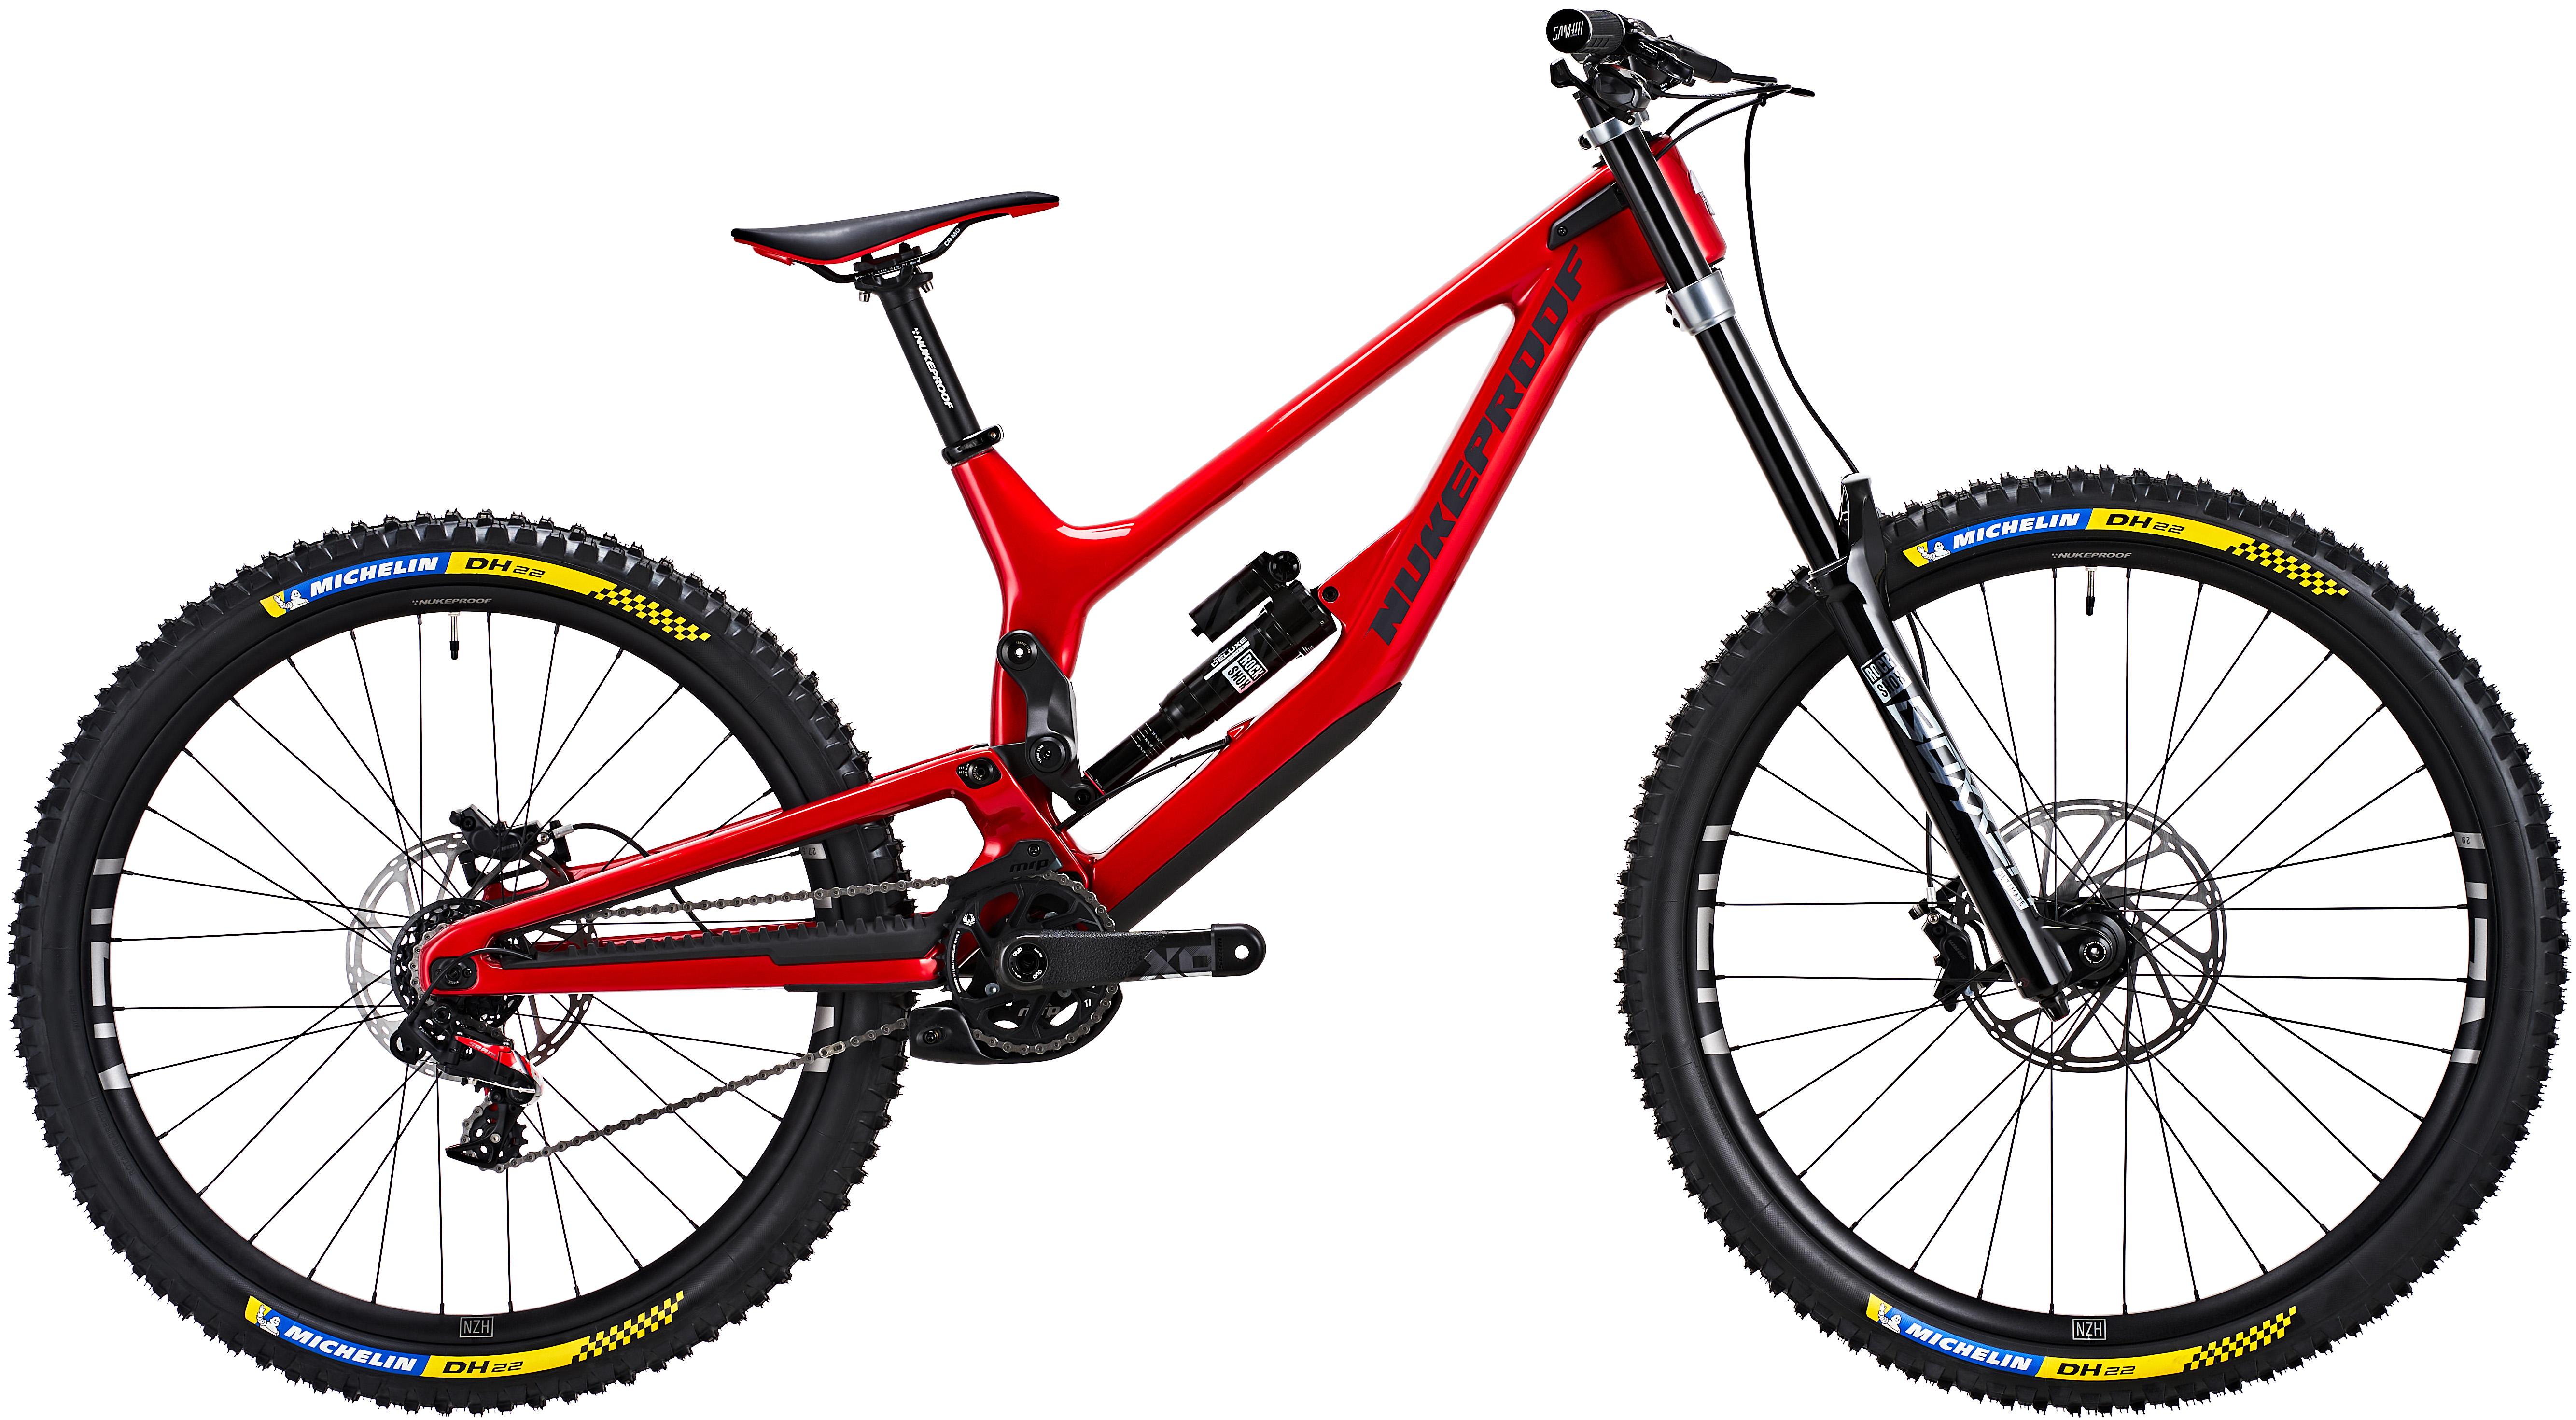 Nukeproof Dissent 297 Rs Carbon Mountain Bike (x01 Dh)  Racing Red